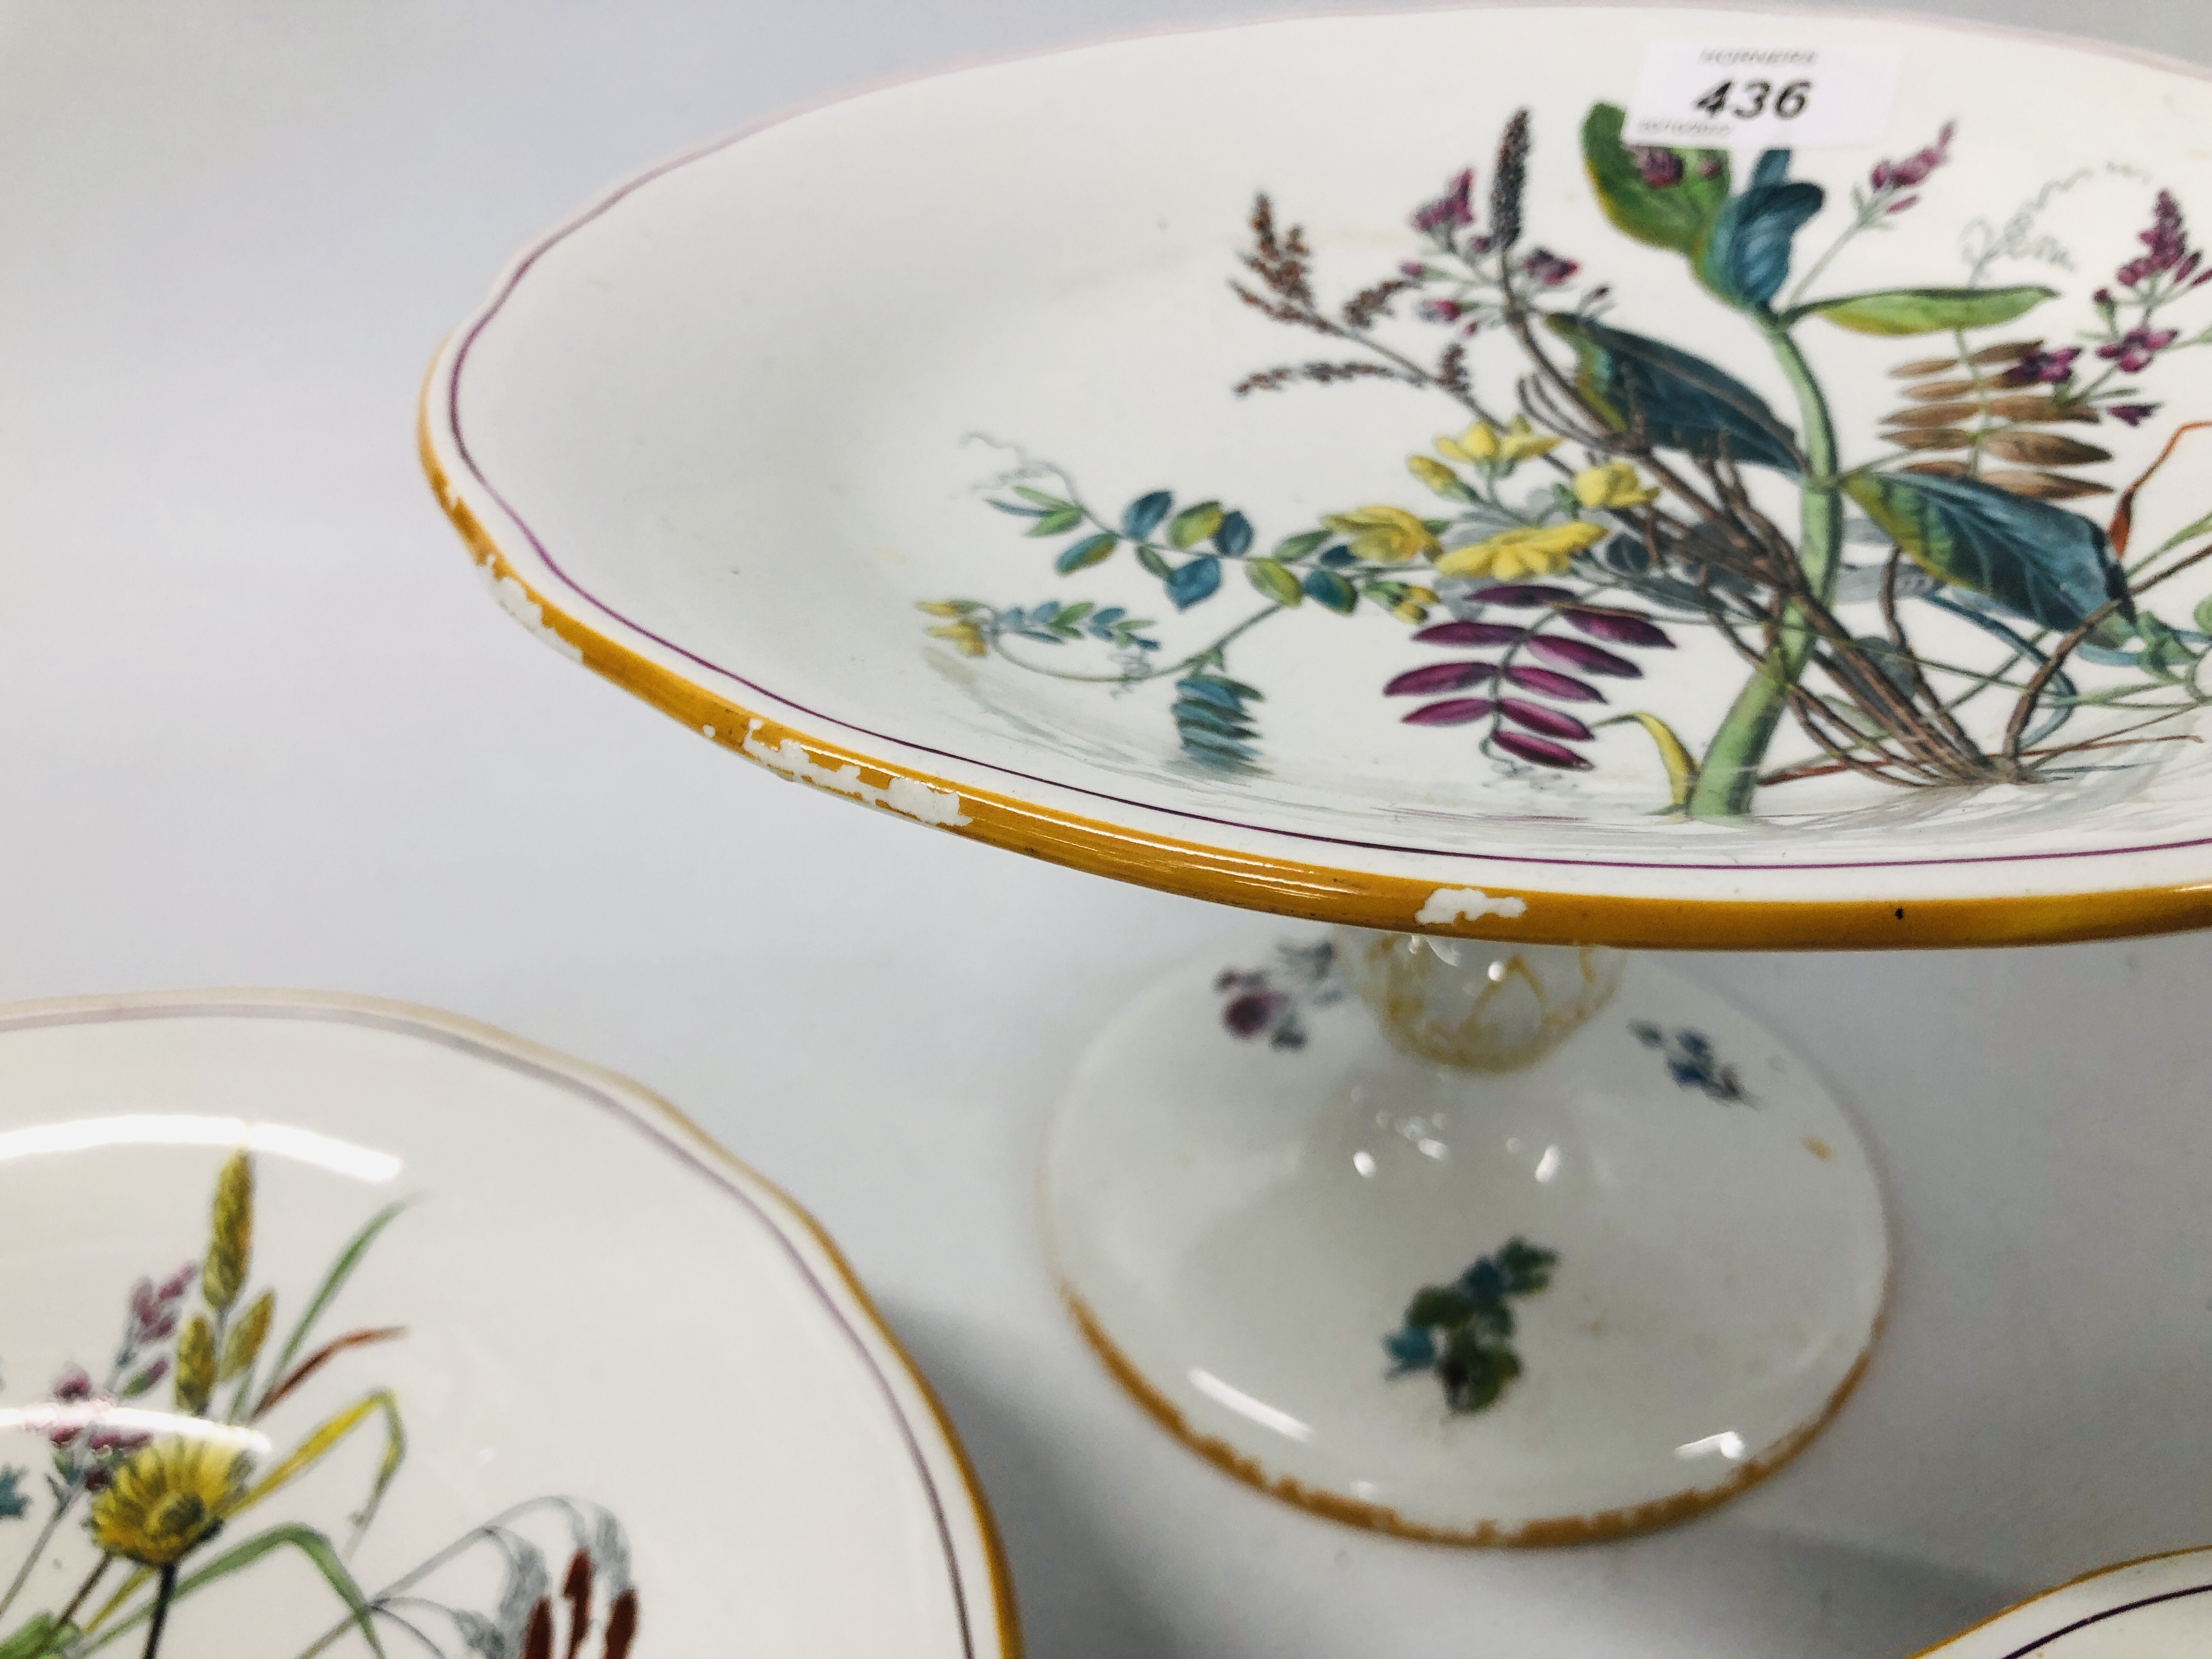 ANTIQUE COPELAND PORCELAIN TAZZA & 2 FOOTED SERVING DISHES PRINTED WITHH WILD FLOWERS, - Image 5 of 6